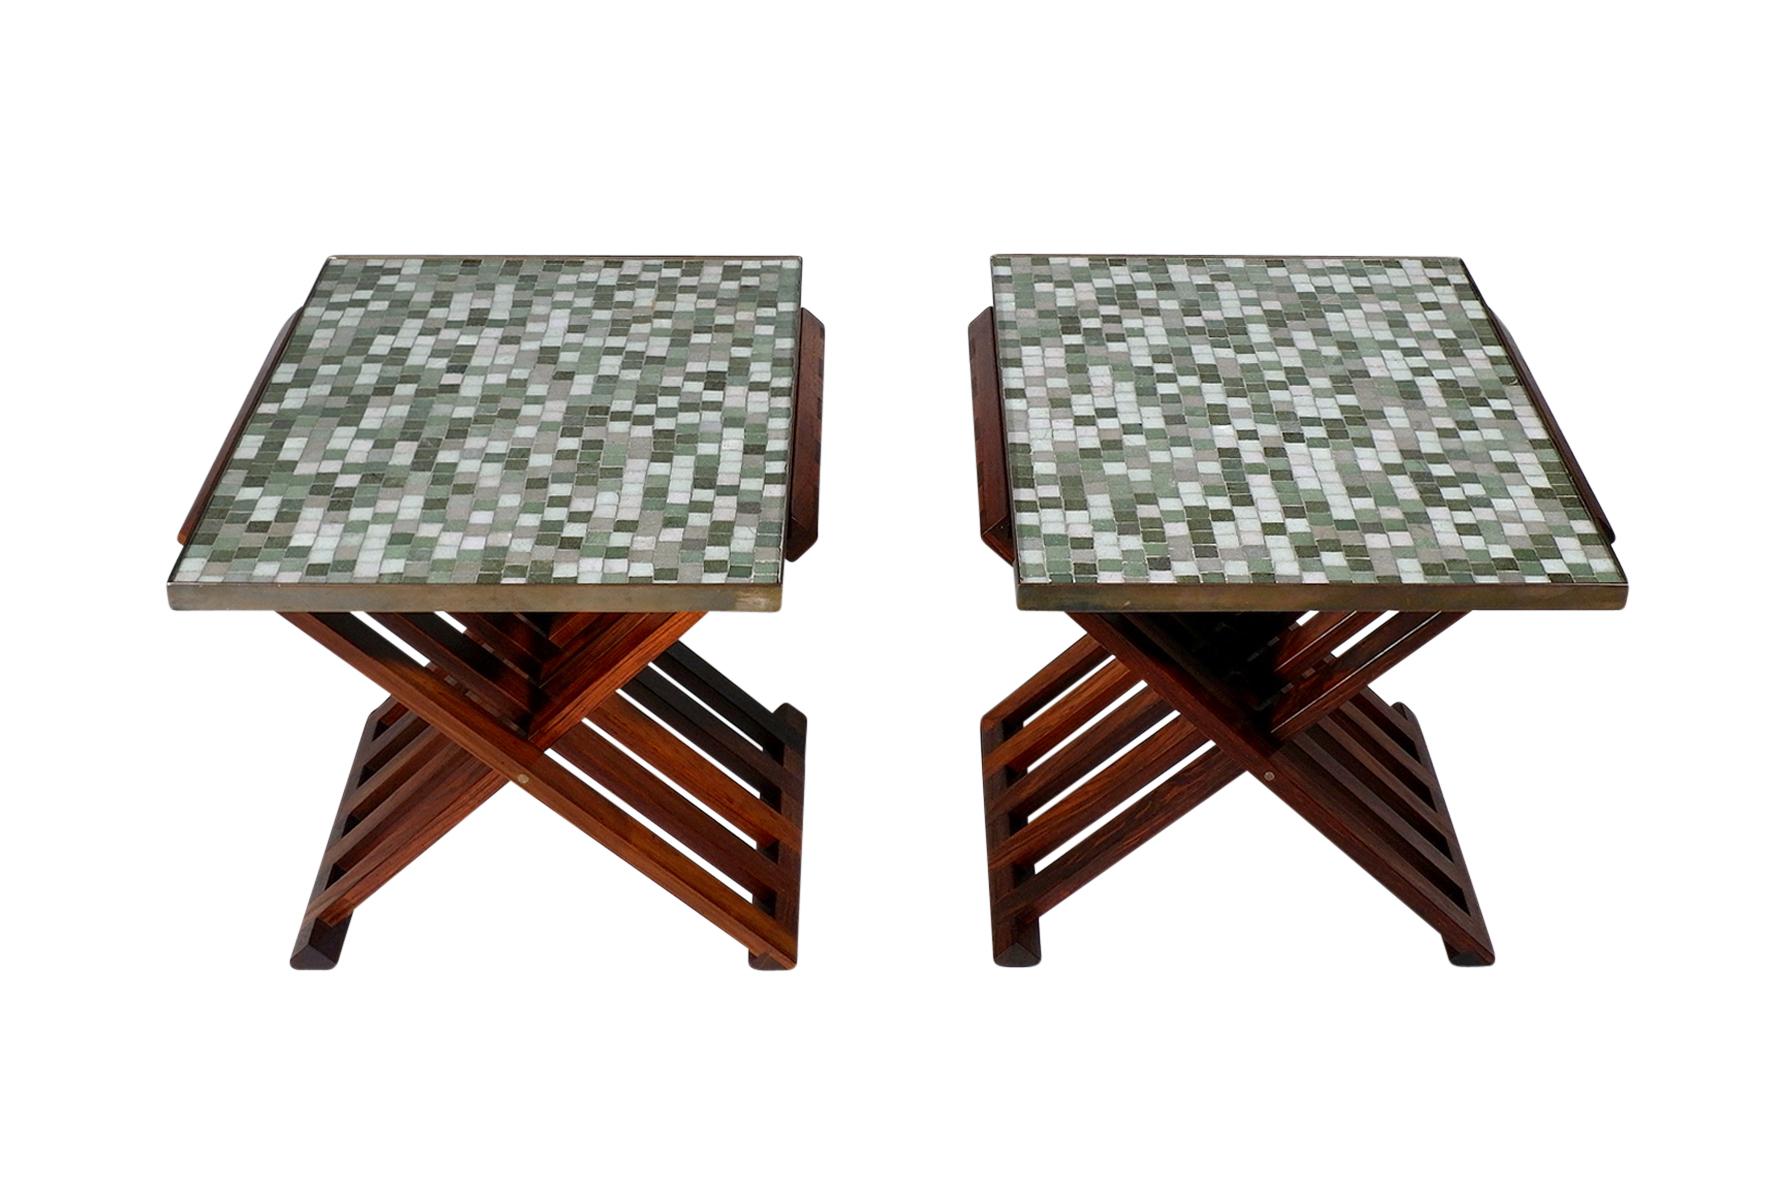 Rare matched pair of tables by Edward Wormley for Dunbar. Folding solid rosewood frames with inset Murano glass tile tops. Table model #5425.